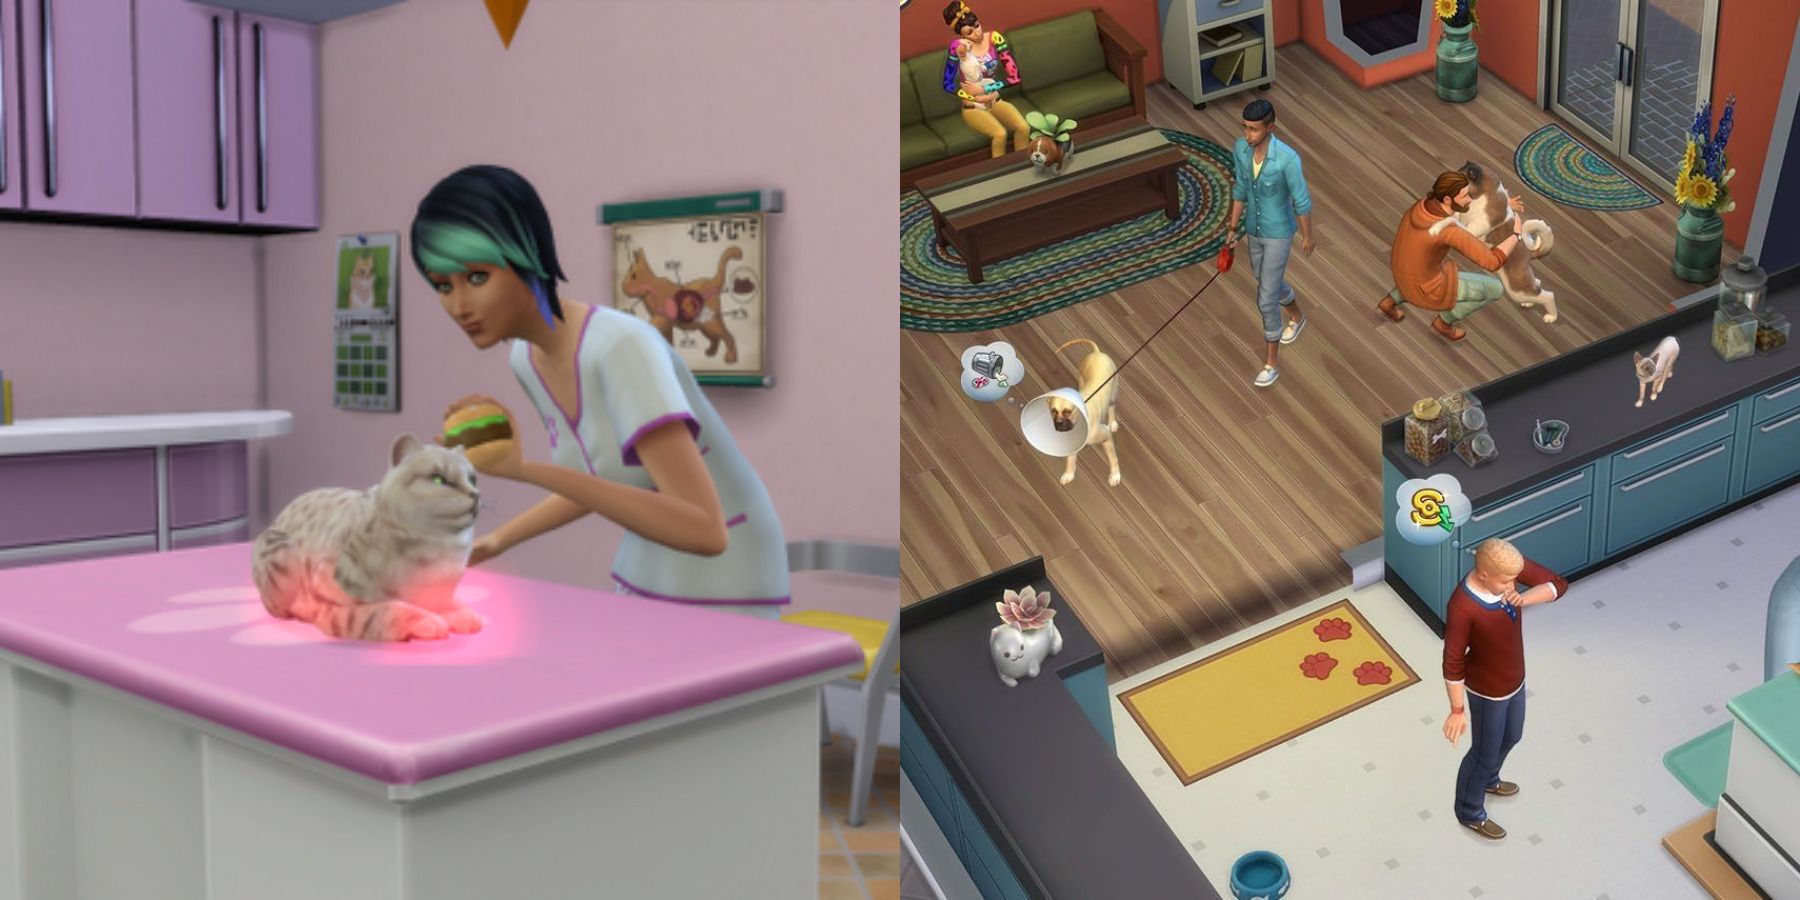 The Sims 4 vet clinic feature